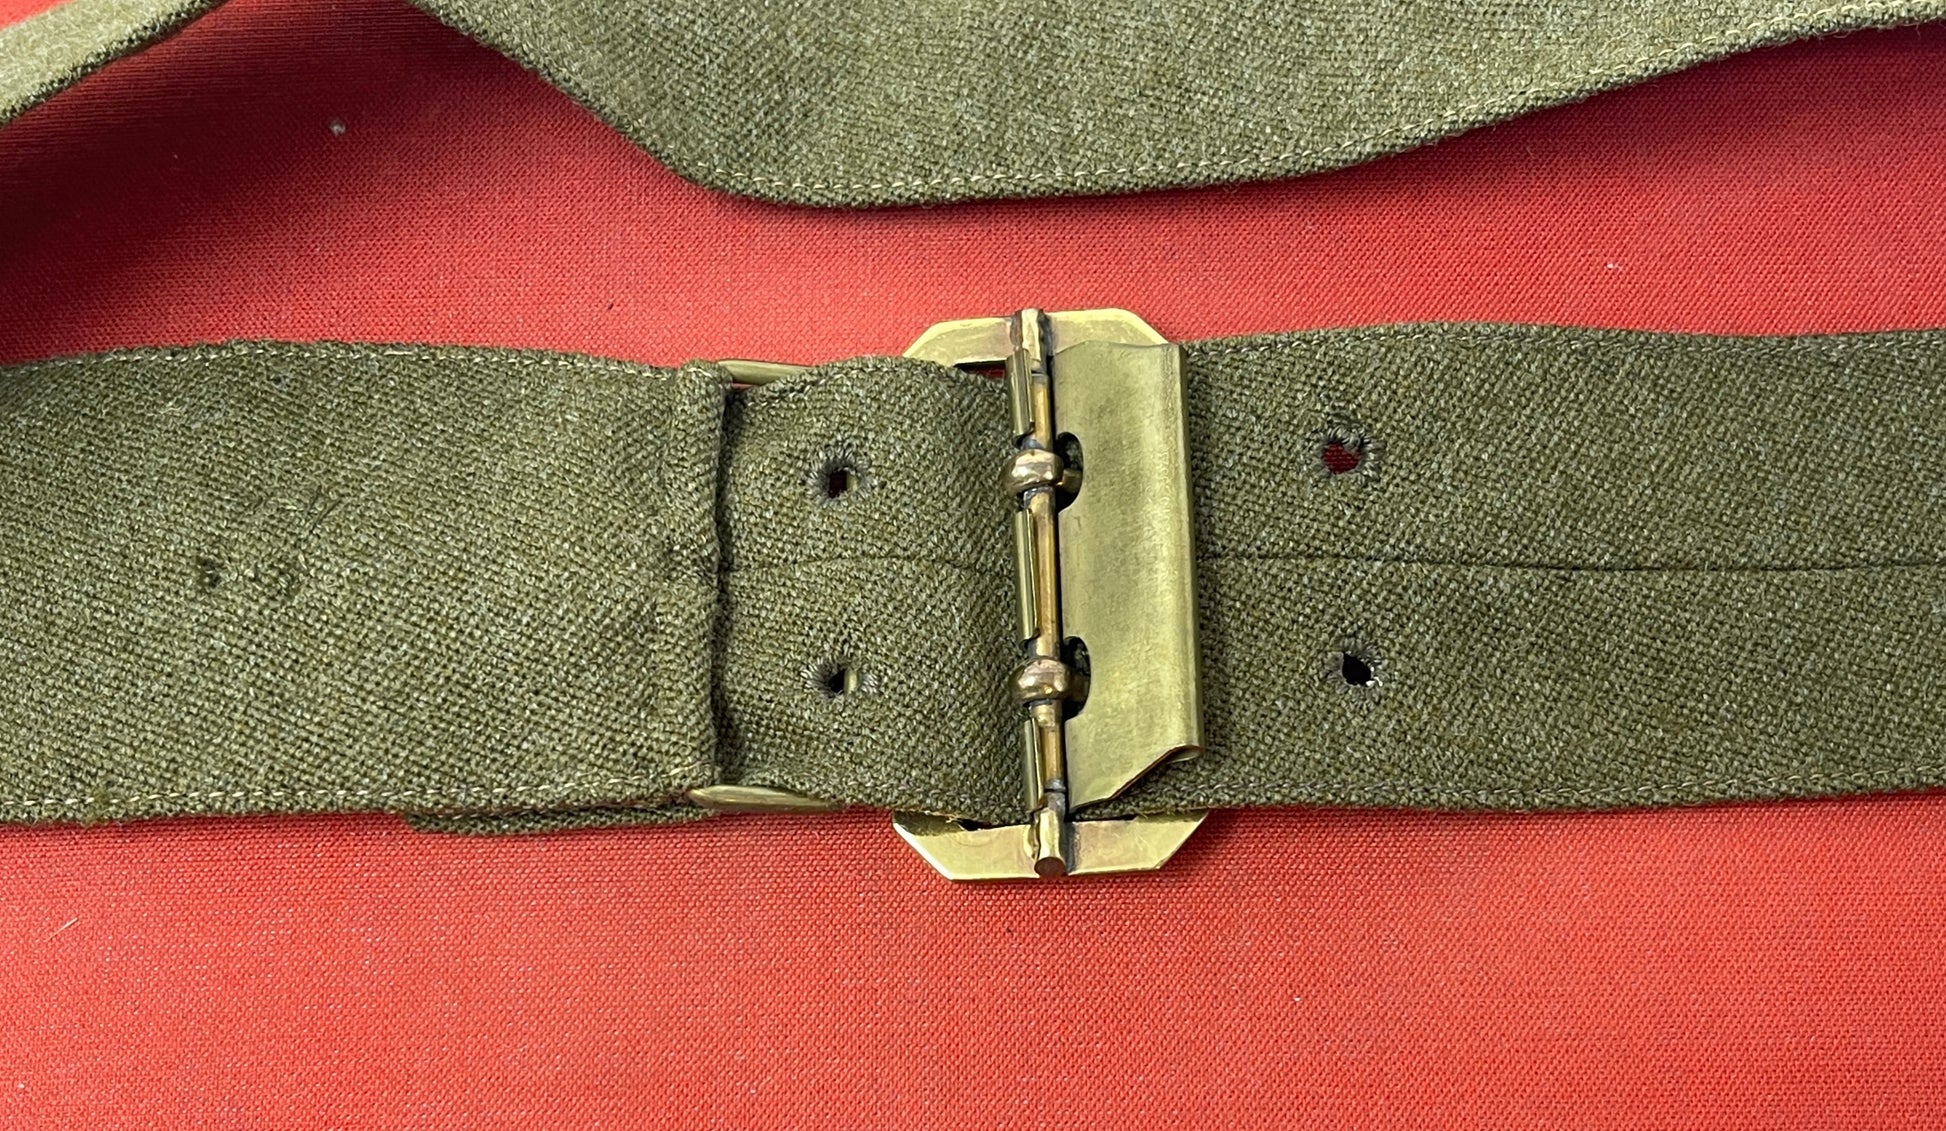 A nice khaki British Army Officers Service Dress Uniform Belt in excellent condition.